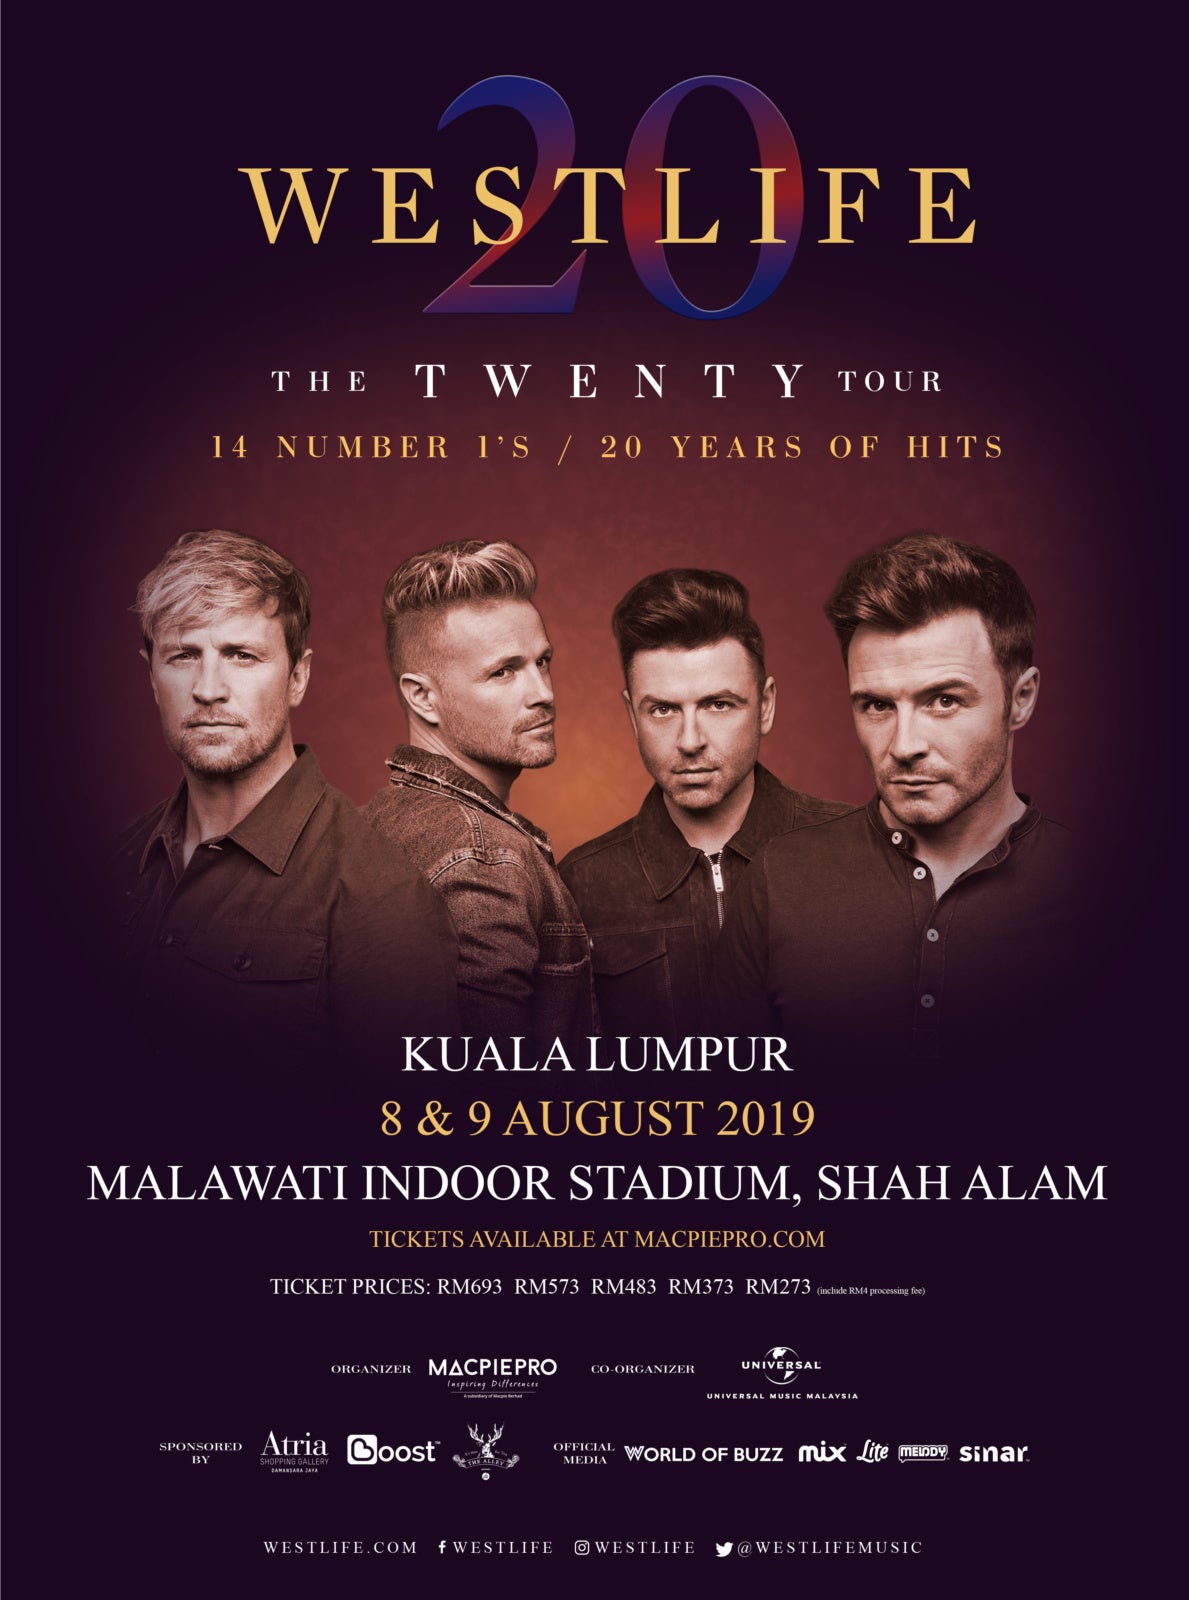 You Can Start Buying Westlife Pre-Sale Tickets at 11am on 13 April at Atria Shopping Gallery! - WORLD OF BUZZ 11